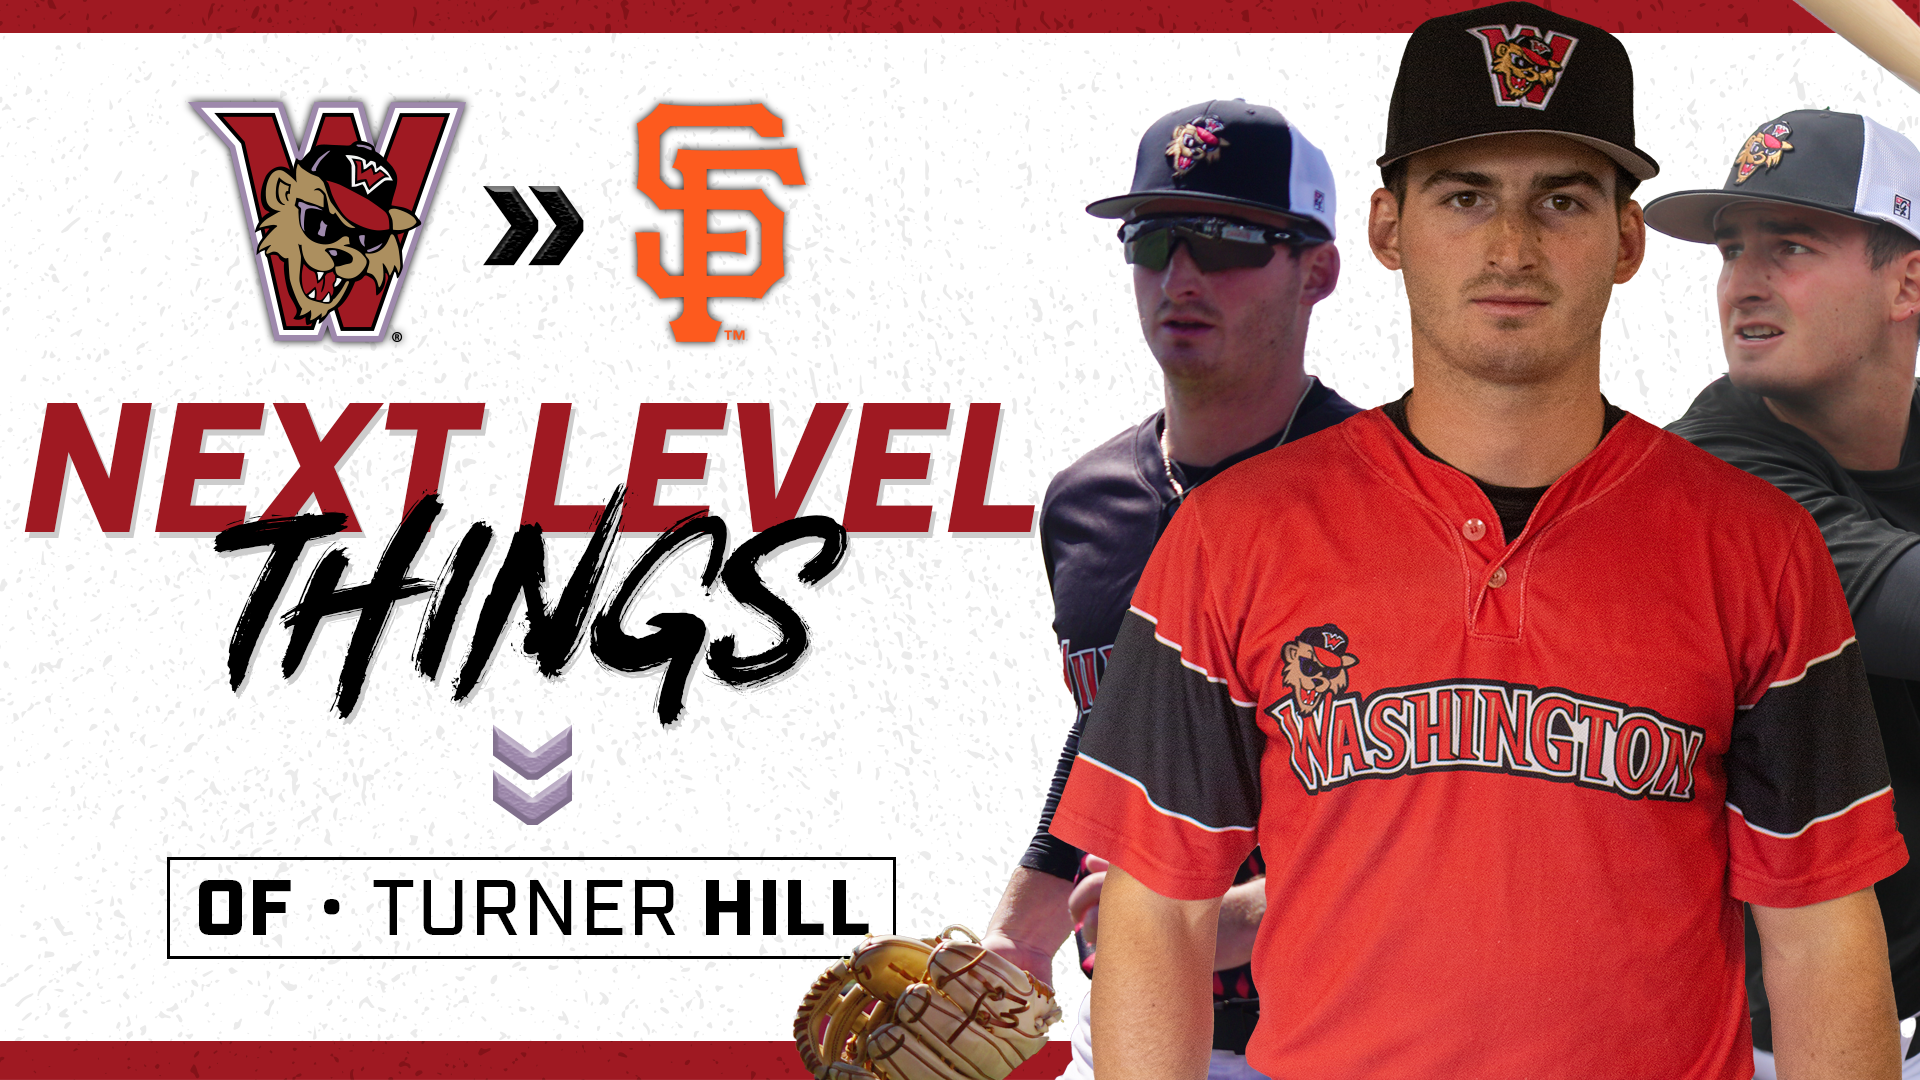 OUTFIELDER TURNER HILL HAS CONTRACT PURCHASED BY SAN FRANCISCO GIANTS ORGANIZATION